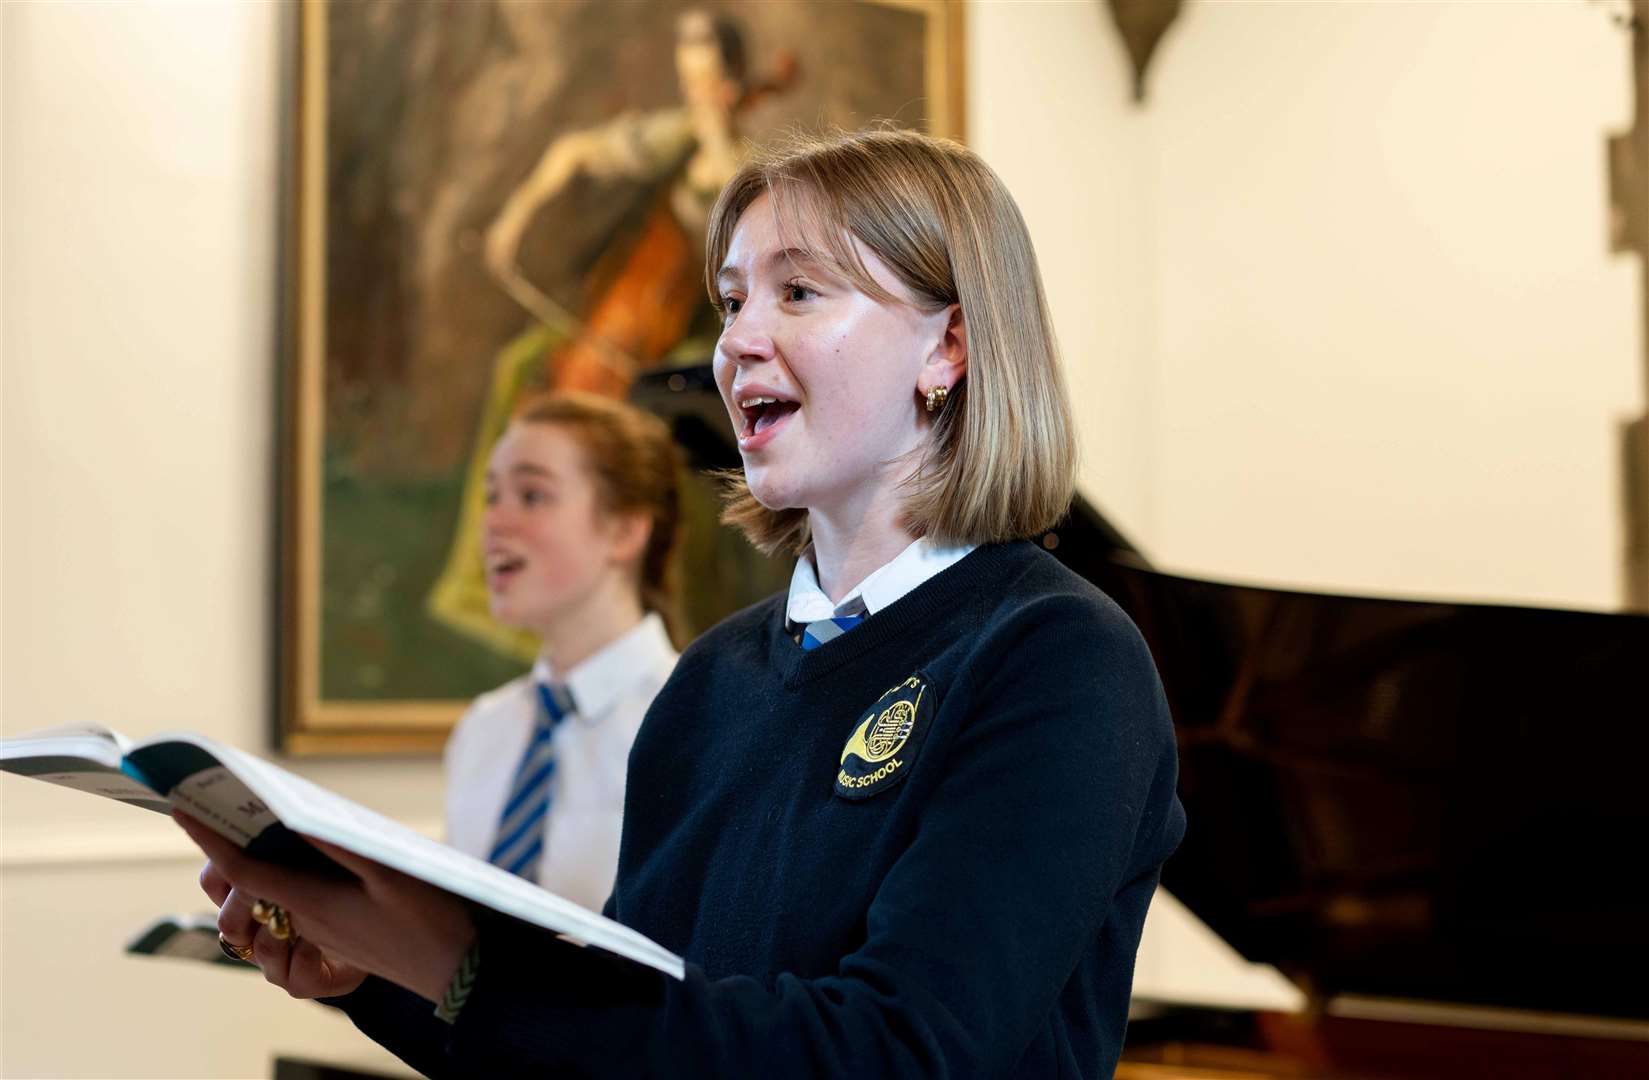 The specialist music school will introduce two full-time vocal programmes tailored for individuals aged 13-19. Picture: Courtesy of St. Mary's Music School